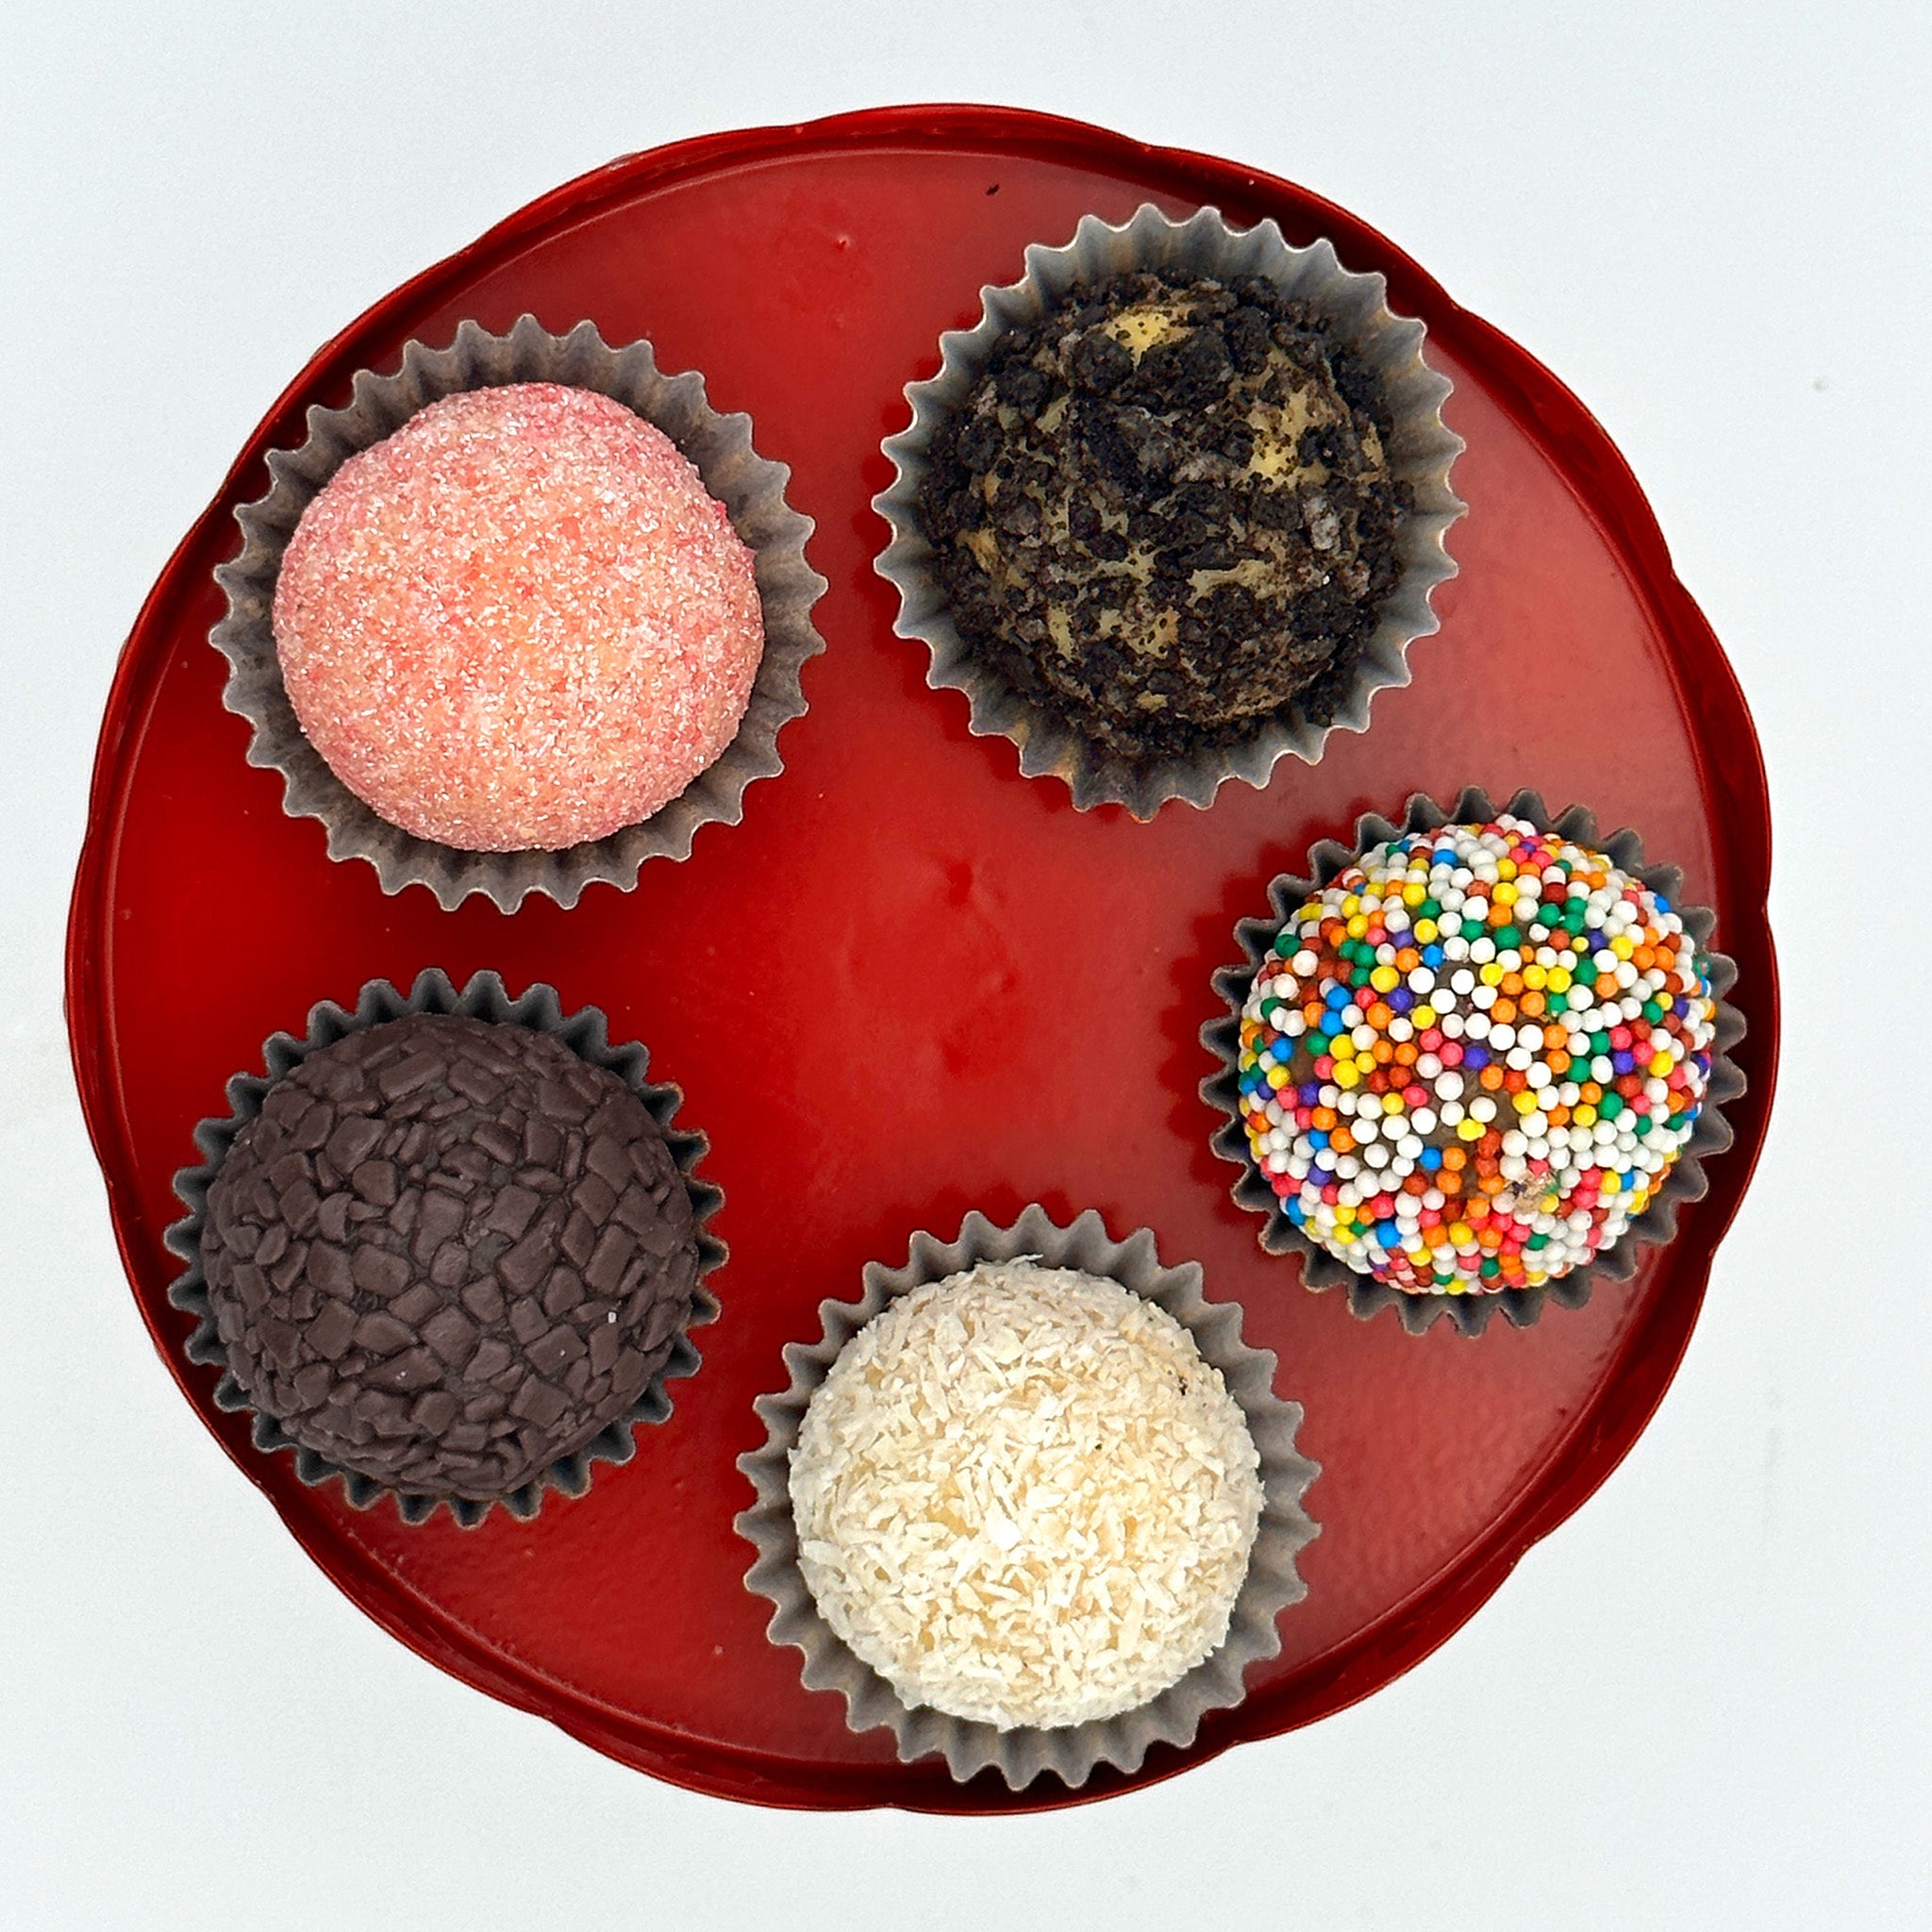 Five colorful sprinkled Anniversary Classic Celebration Brigadeiros in a red tin on a white background.